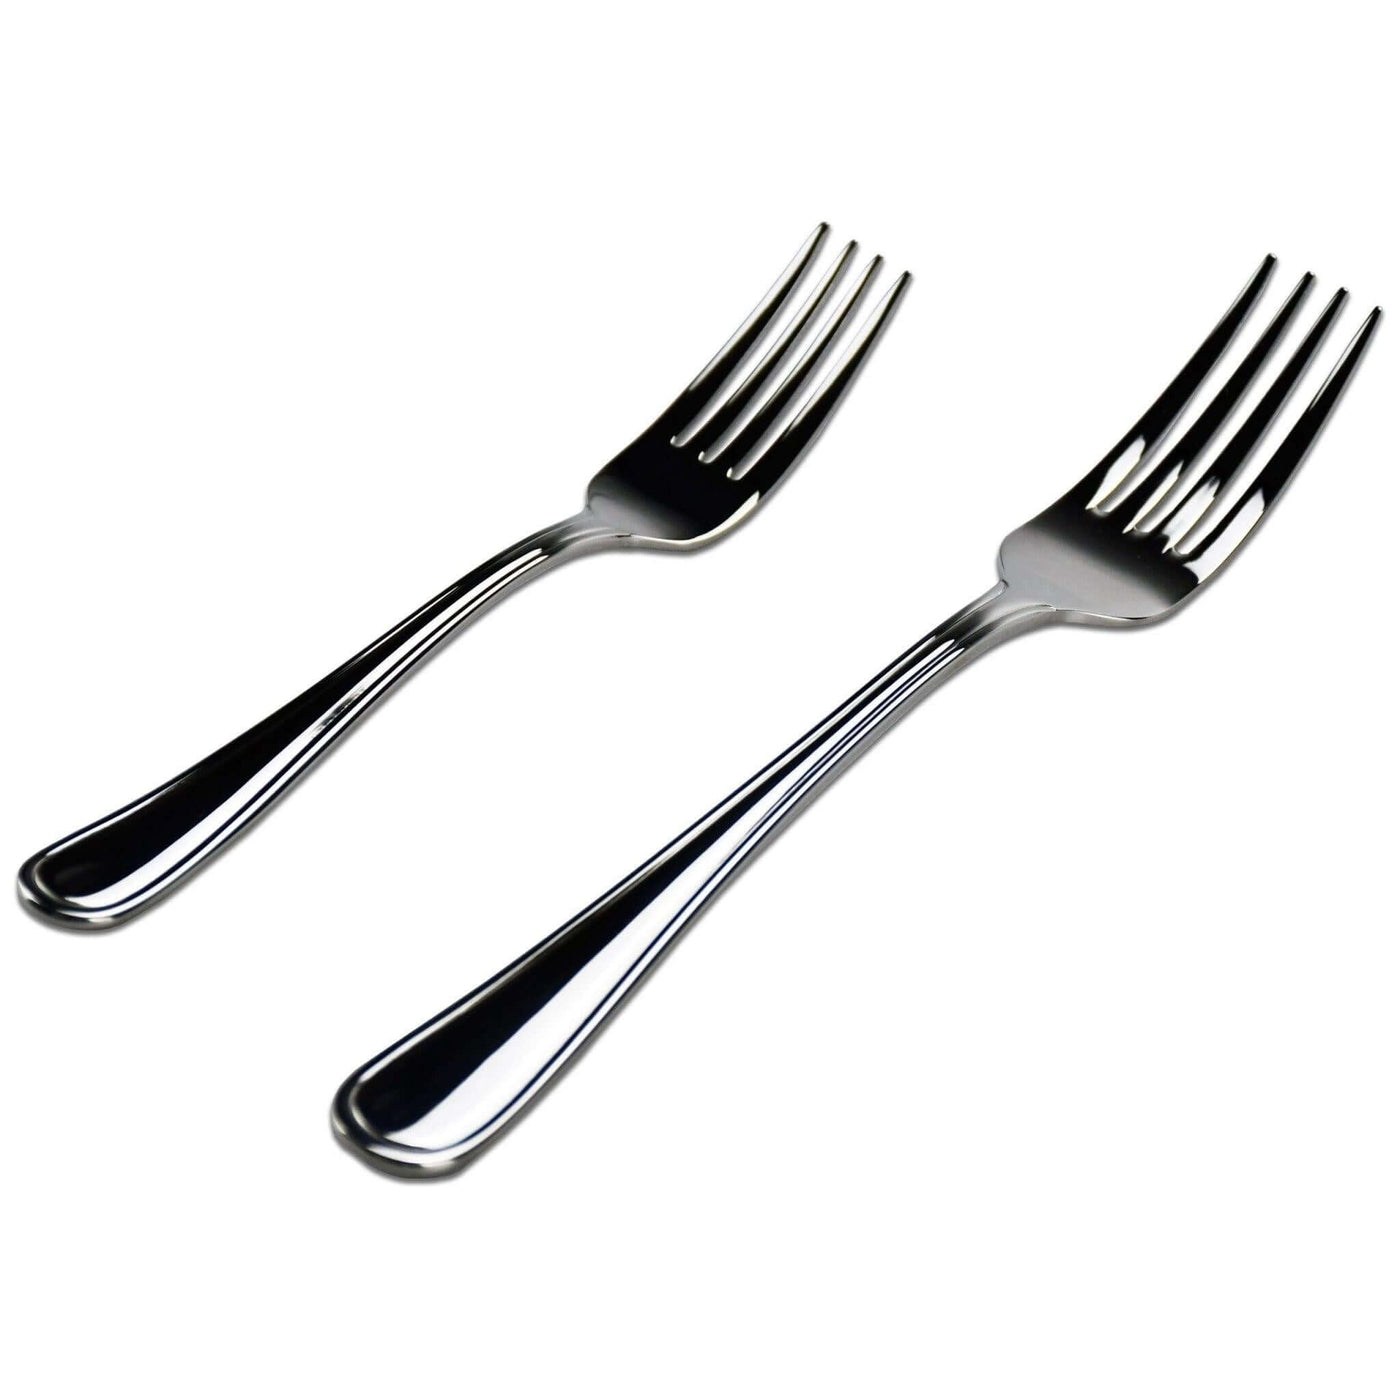 Barenthal Elegance 20-pc. 18/10 Stainless Steel Silverware Set (Service for 4)